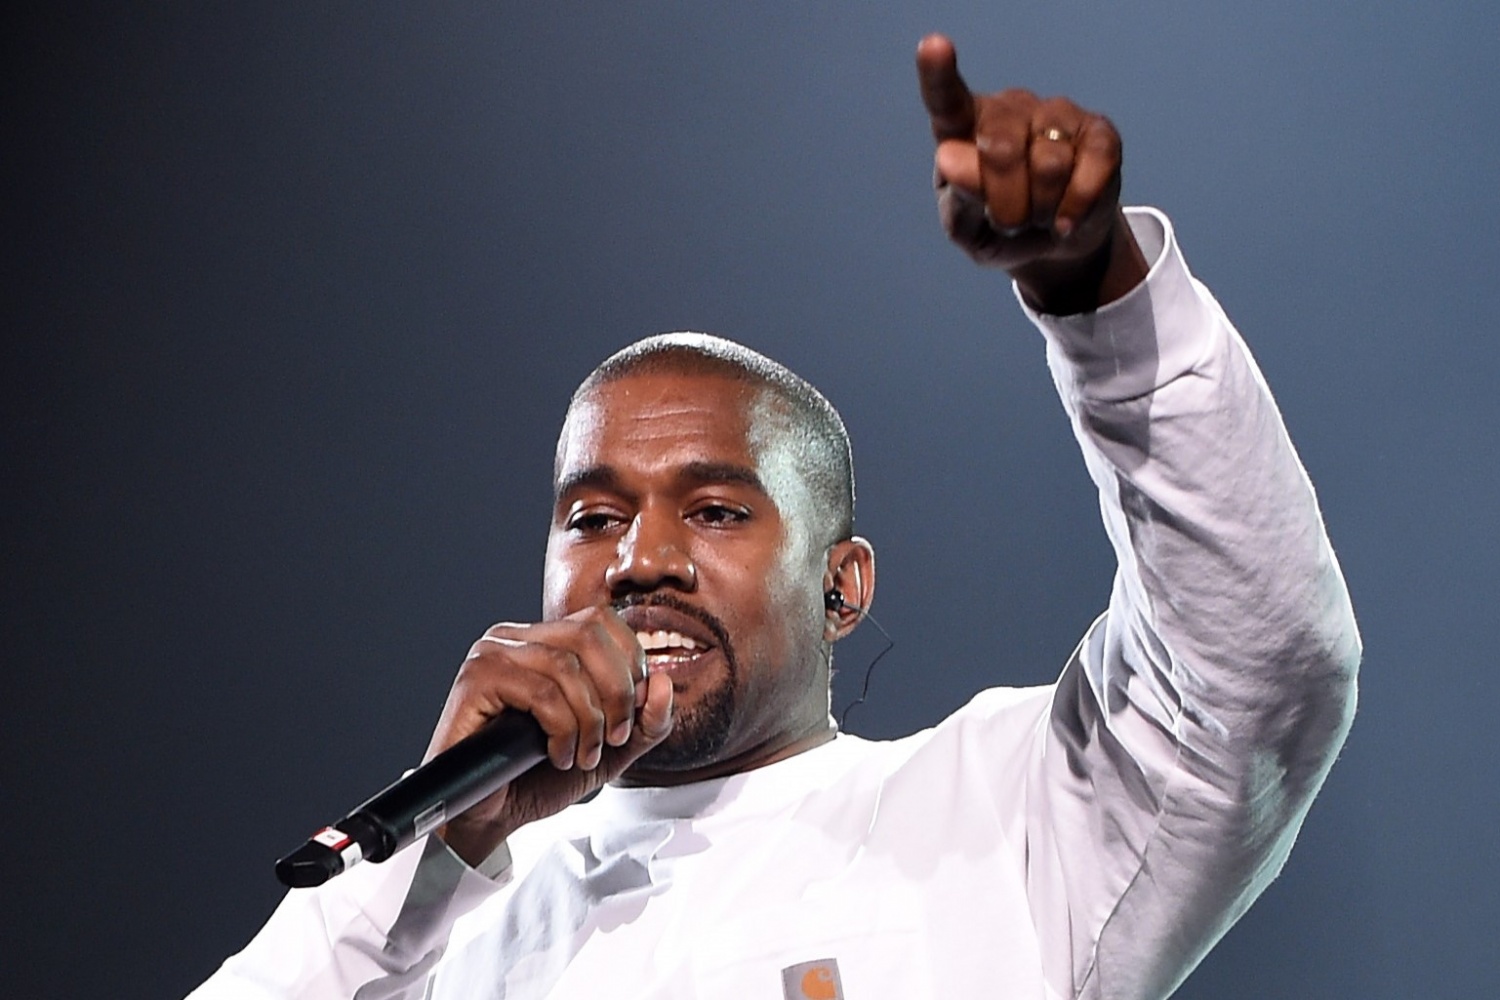 Kanye West Accused of Deliberately Delaying The Gap Lawsuit Trial Through Lawyer’s Sudden Request